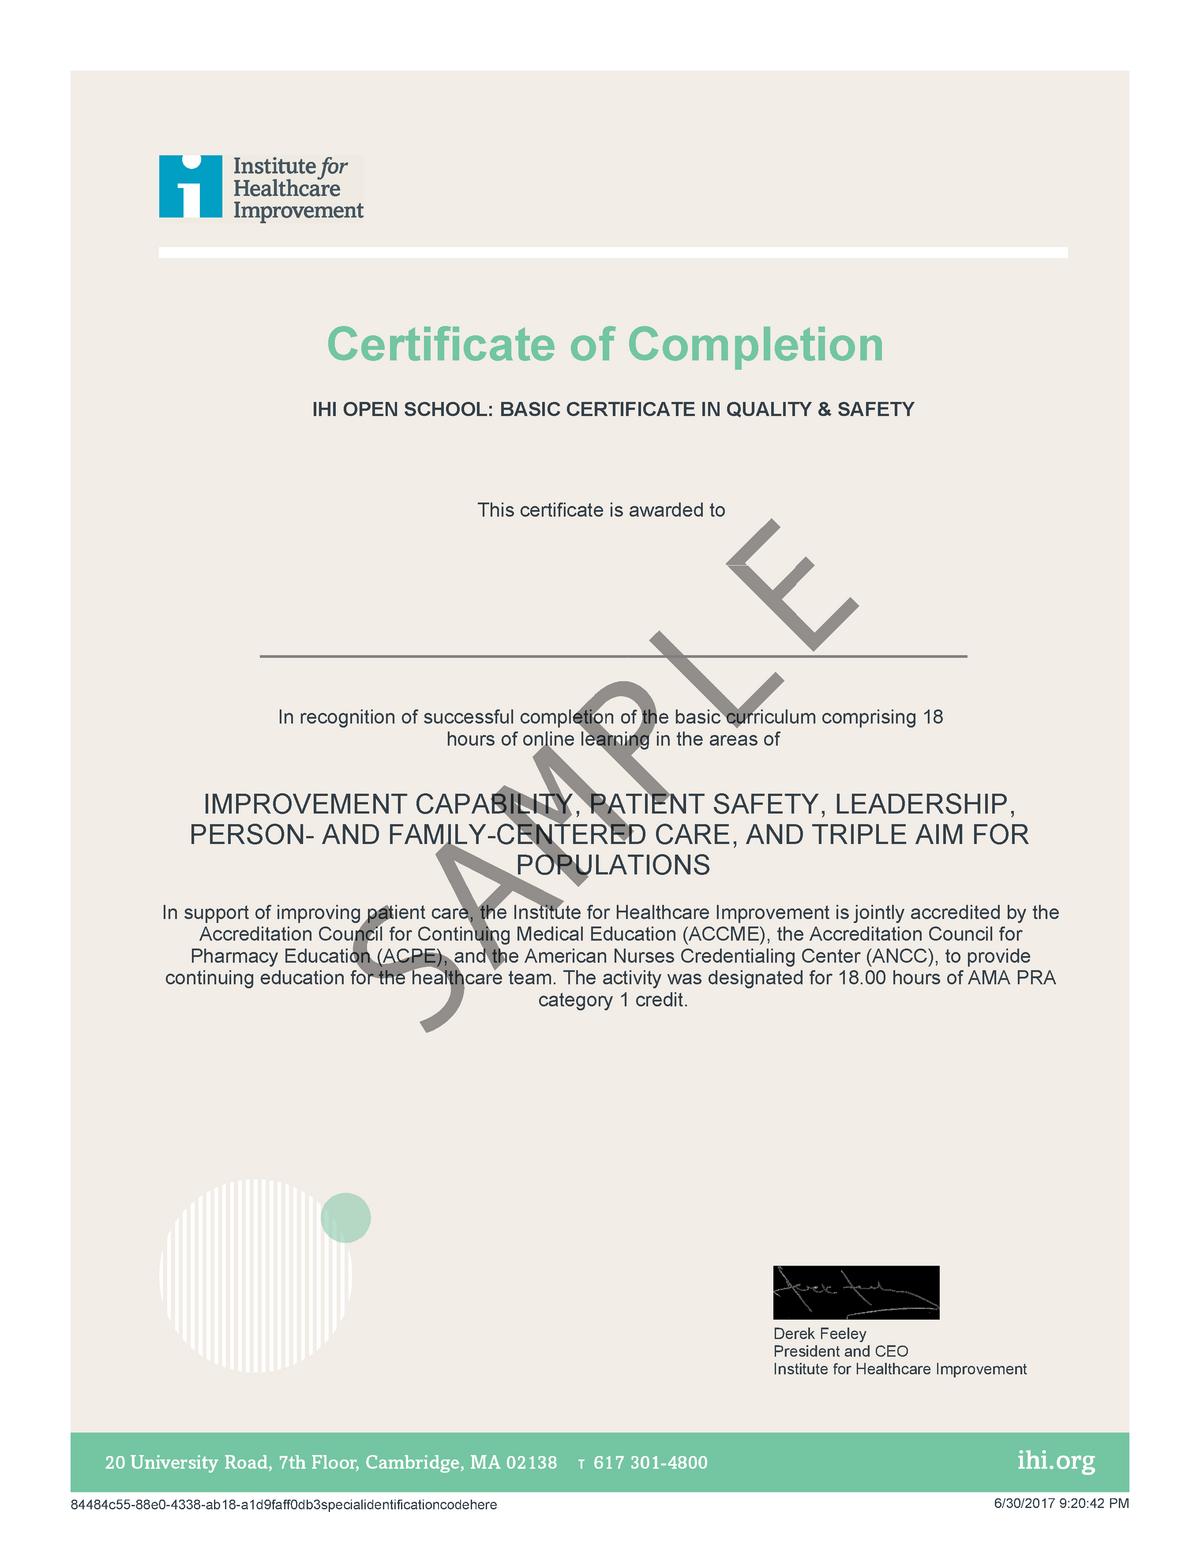 Updated Sample IHI Certificate of Completion Certificate of